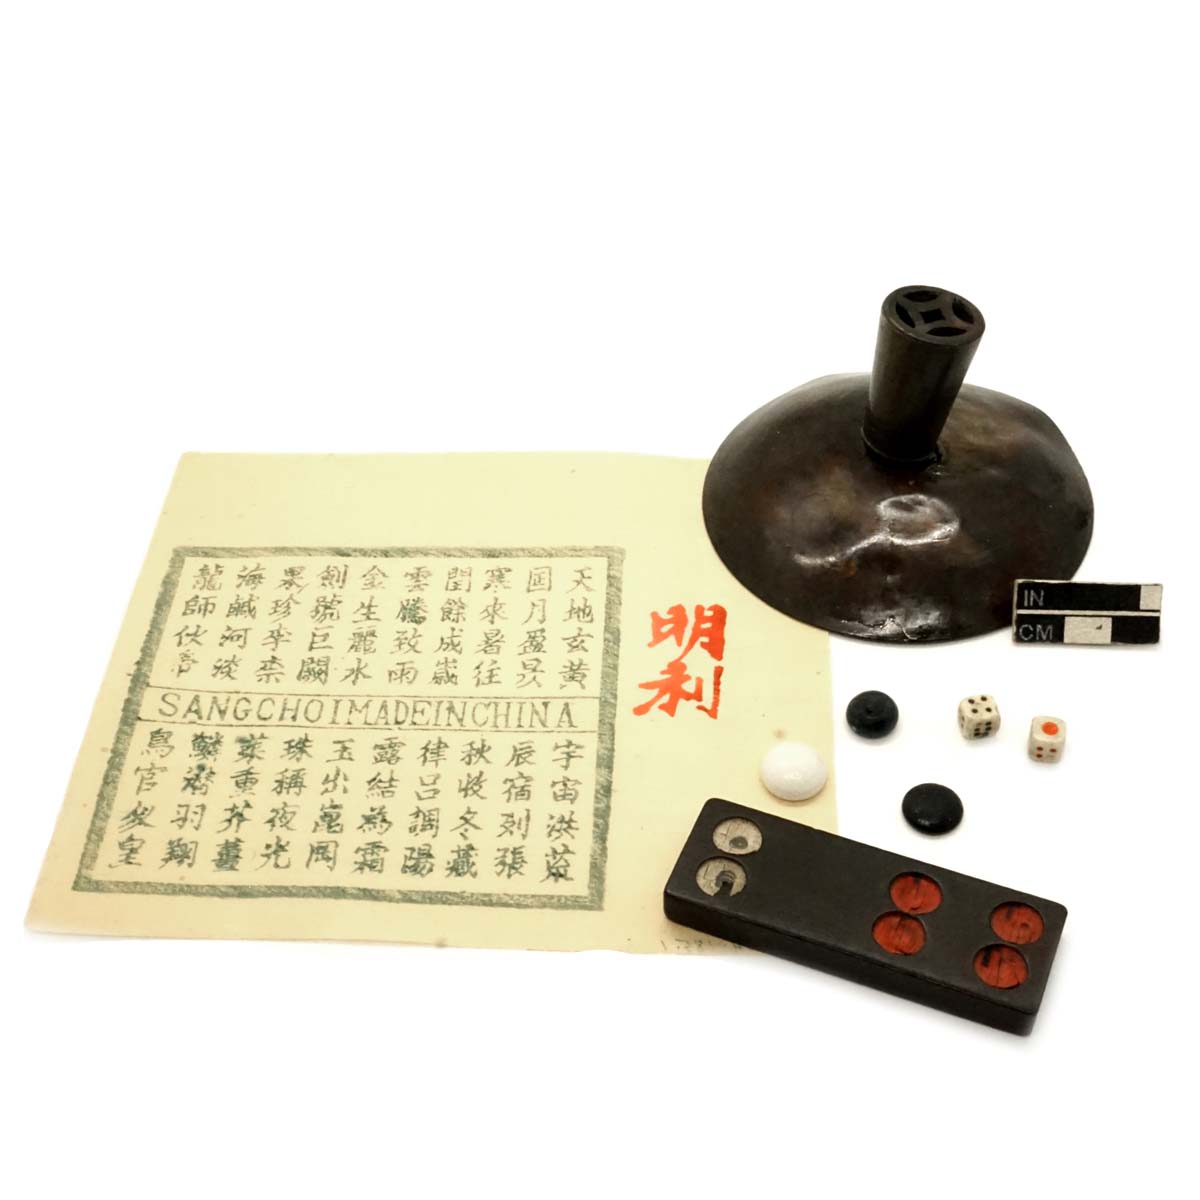 Chinese lottery ticket, “spreading out cover,” glass gaming pieces, dice, and a domino. 